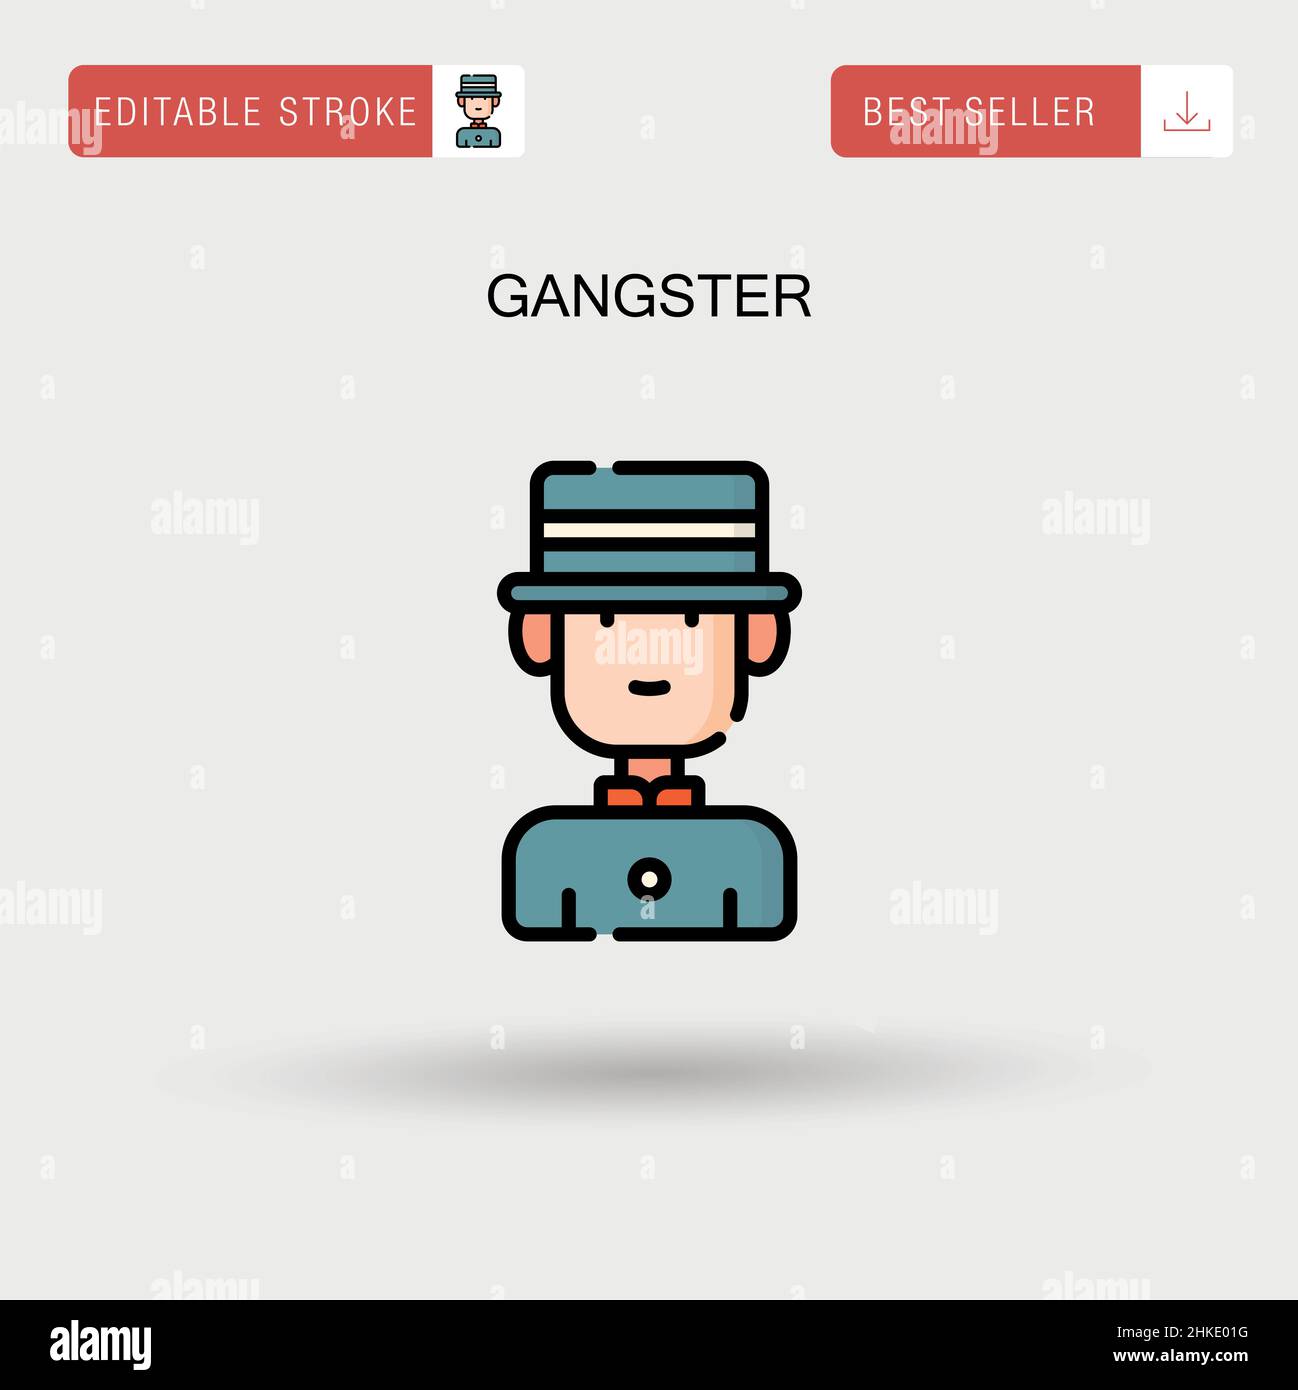 Gangster Simple vector icon. Stock Vector